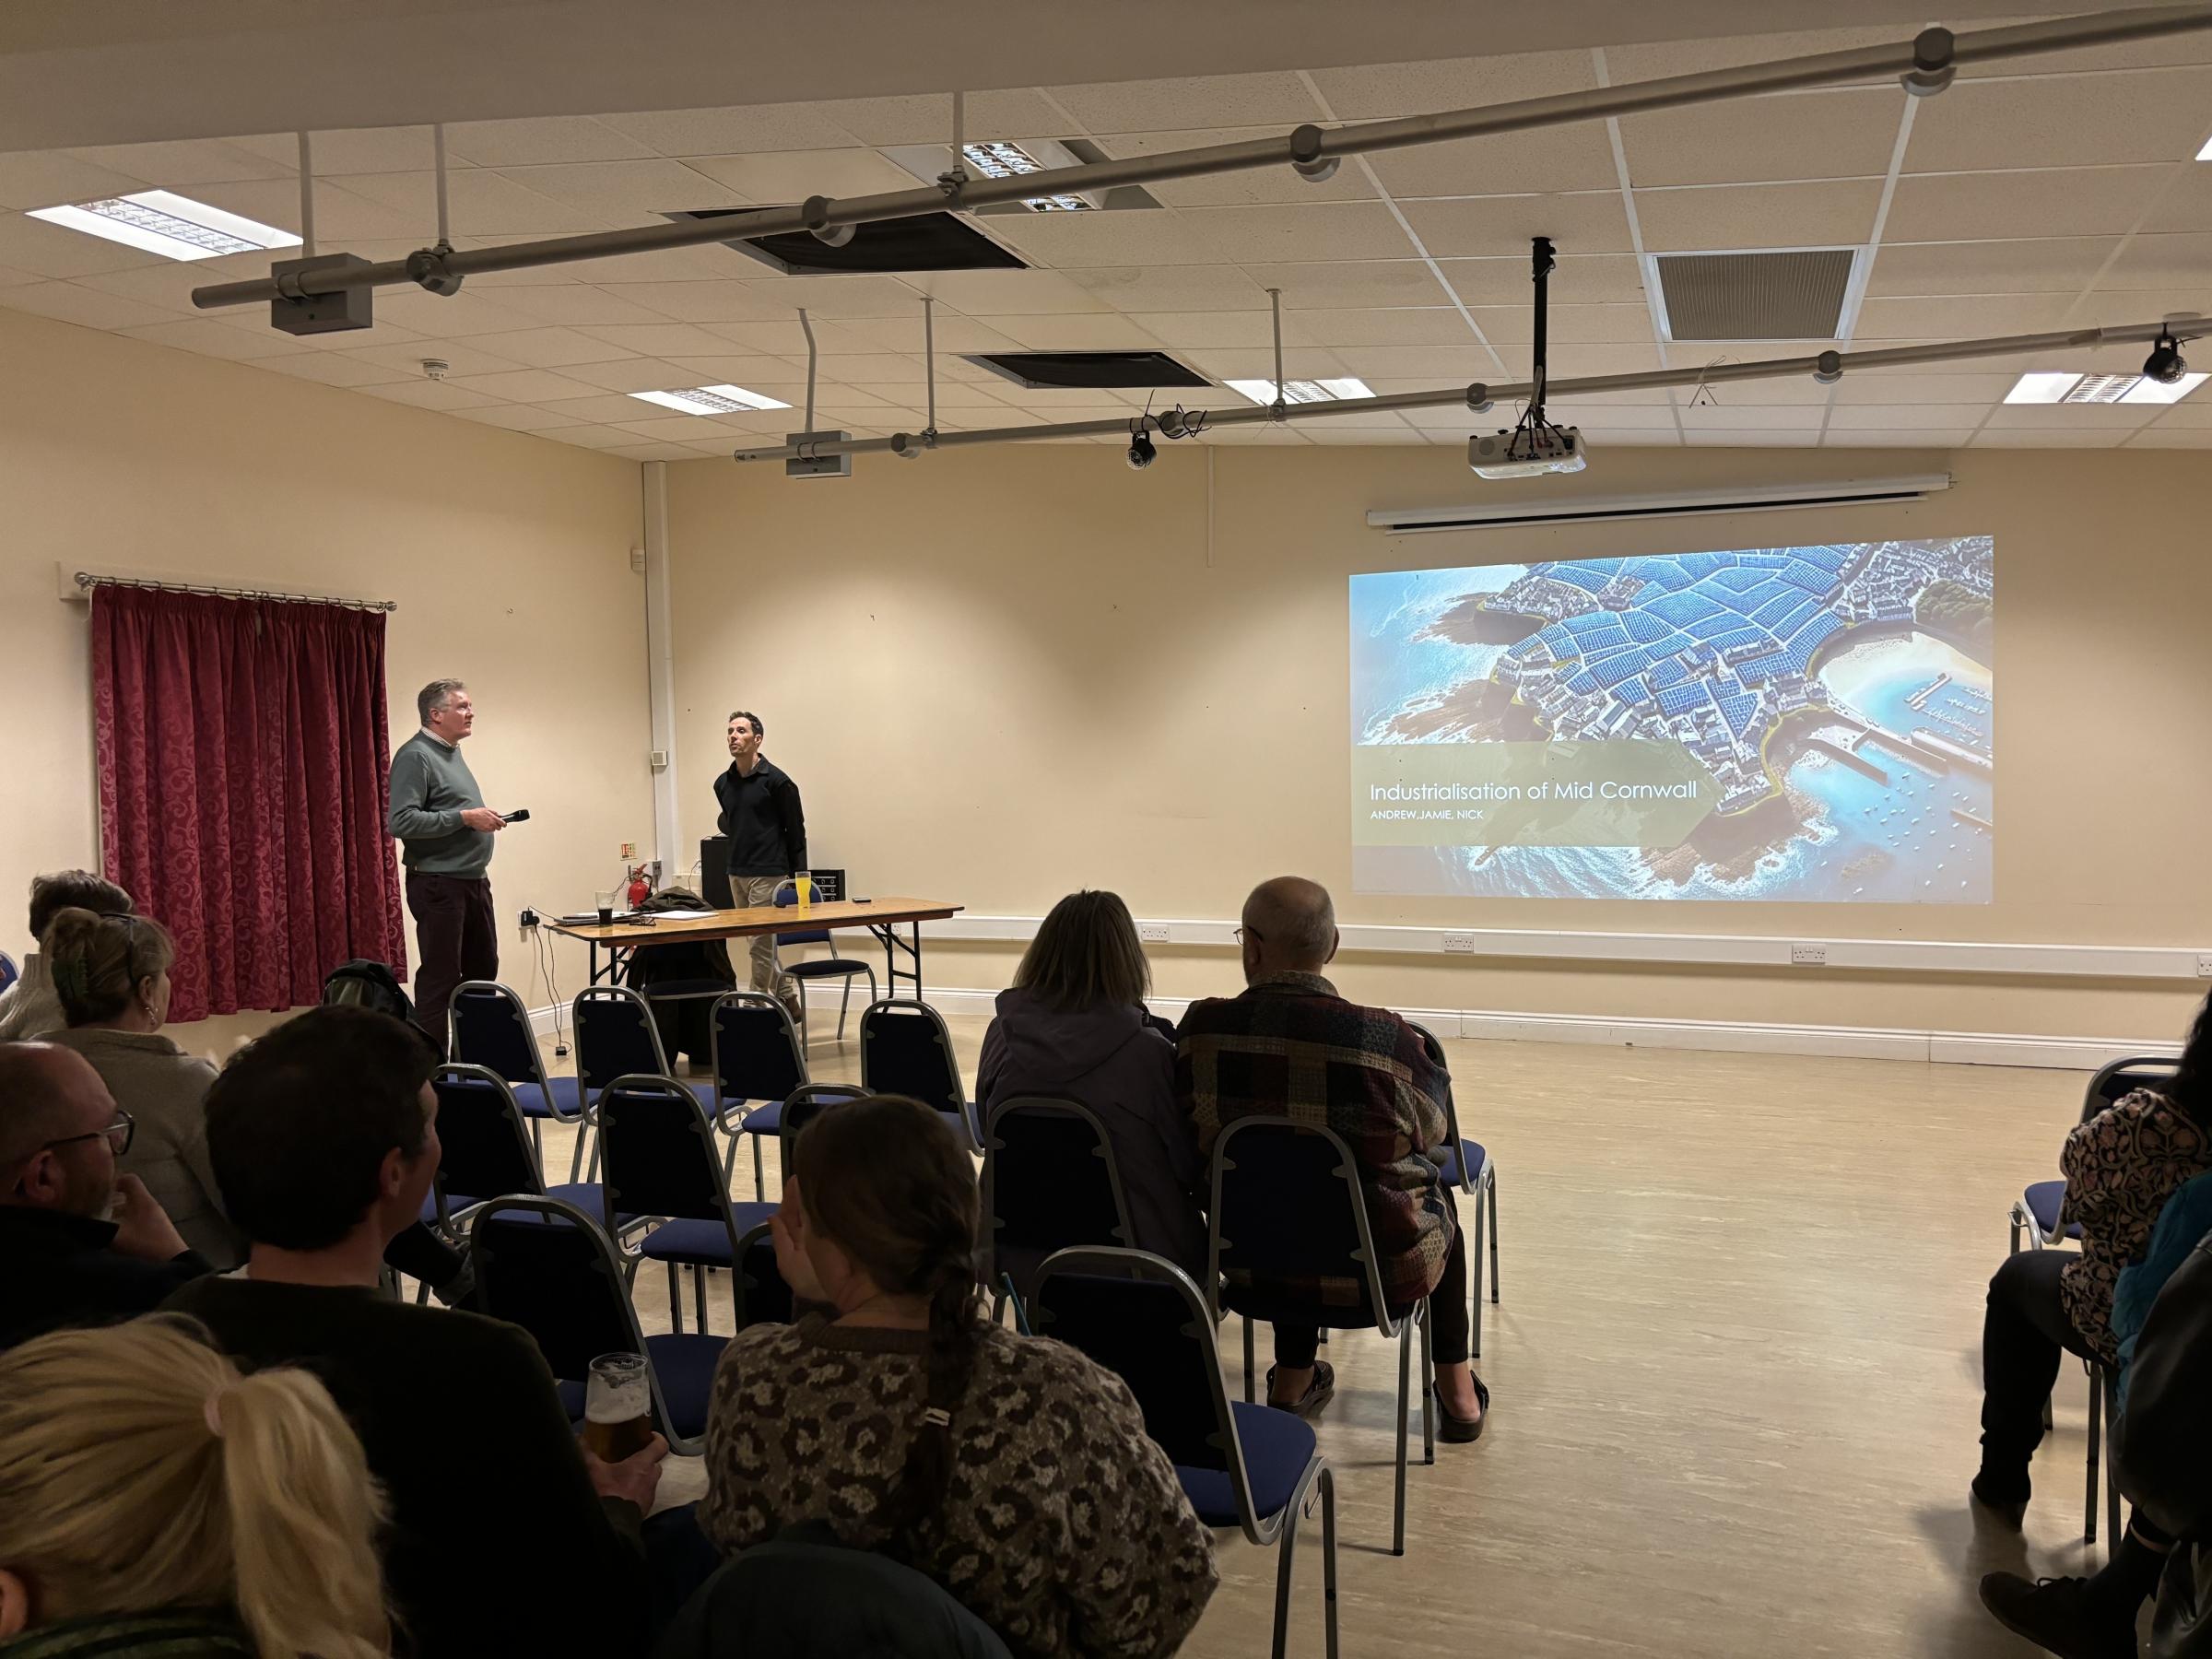 Andrew Stanners, left, and Jamie Crossman prepare to present a talk about the \Industrialisation of Mid Cornwall\ at the solar farms public meeting in St Erme (Pic: Lee Trewhela / LDRS)